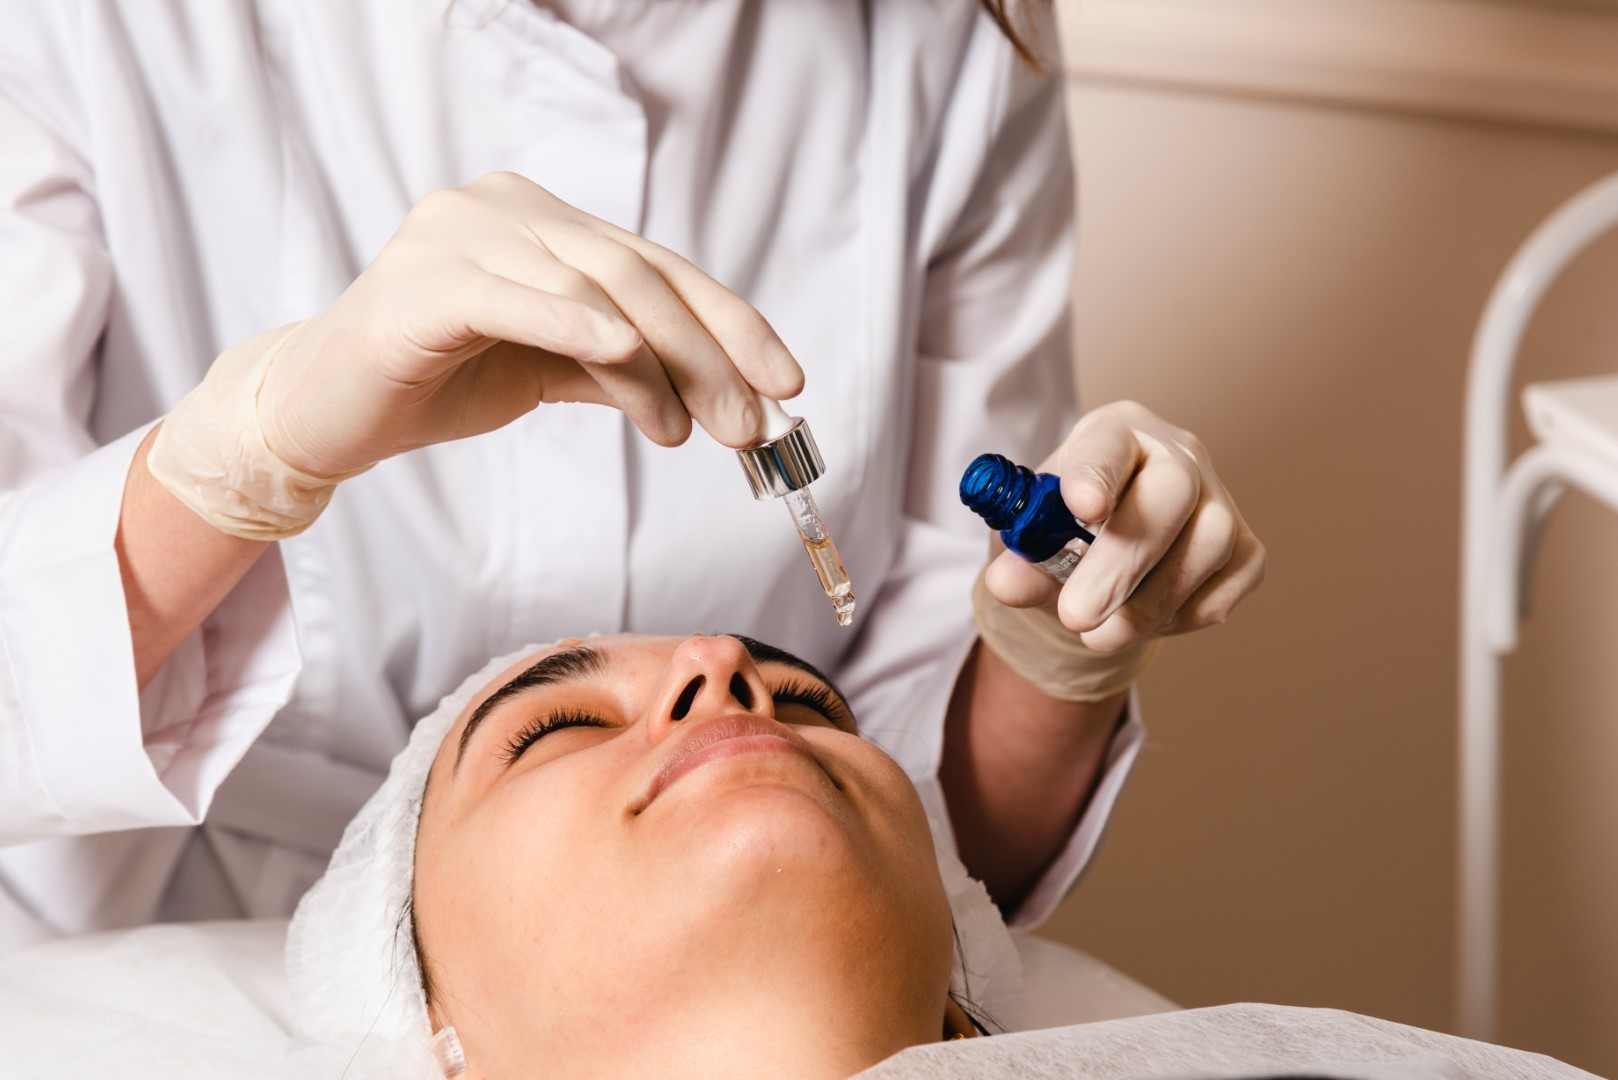 Aesthetician applying serum using a dropper on a female client's face during a skincare treatment in a clinic.